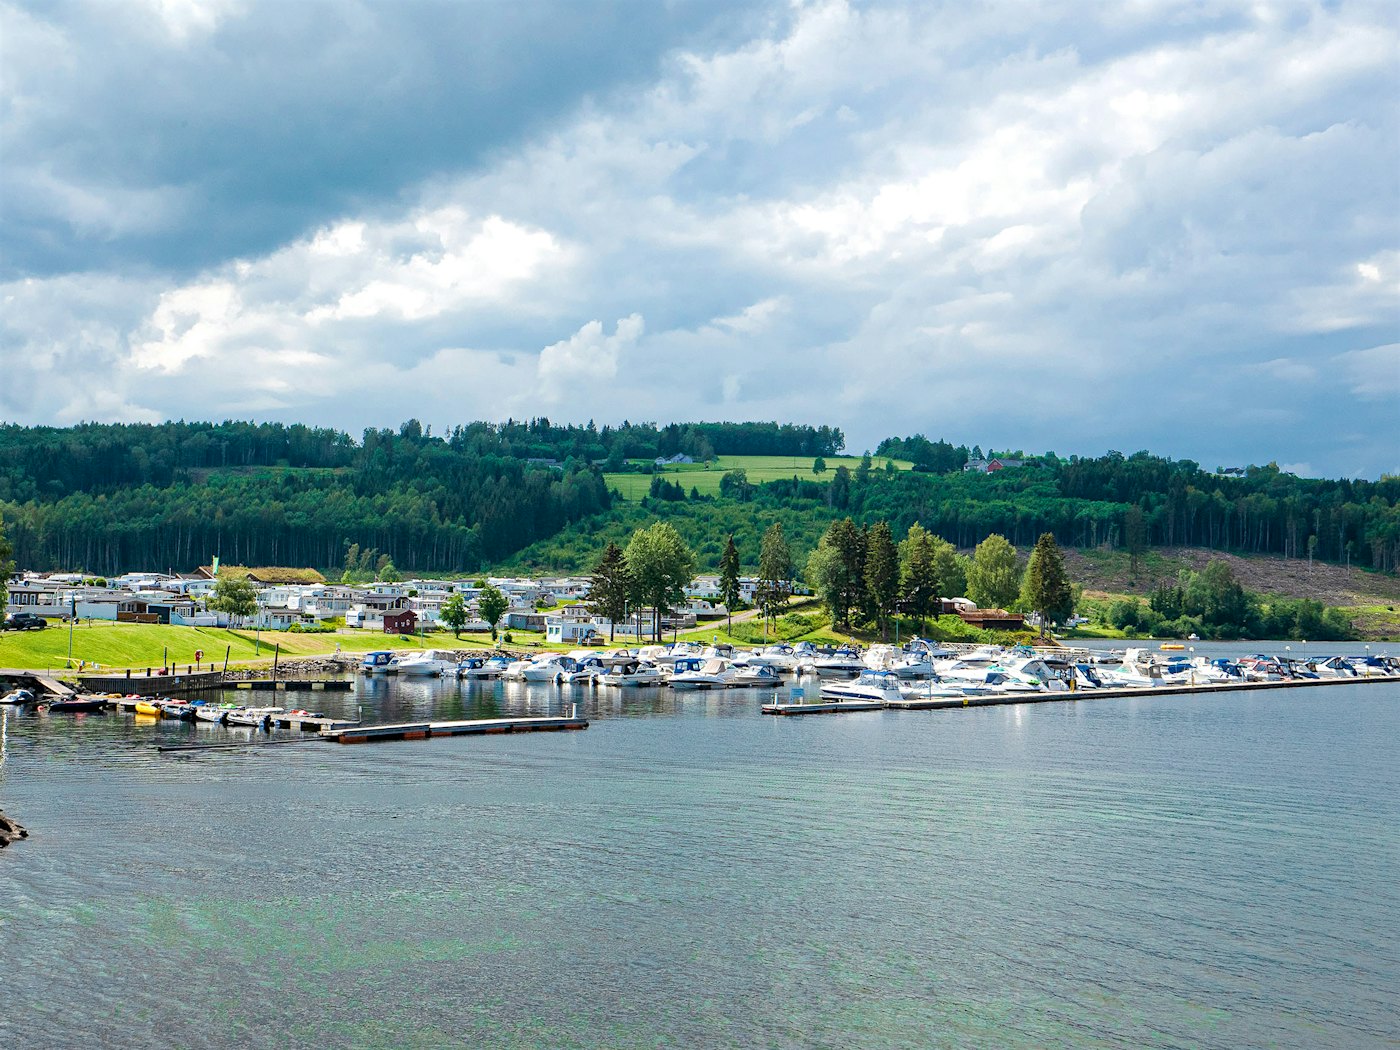 Overview of the campsite with the marina in front and the forest in the background. Photo